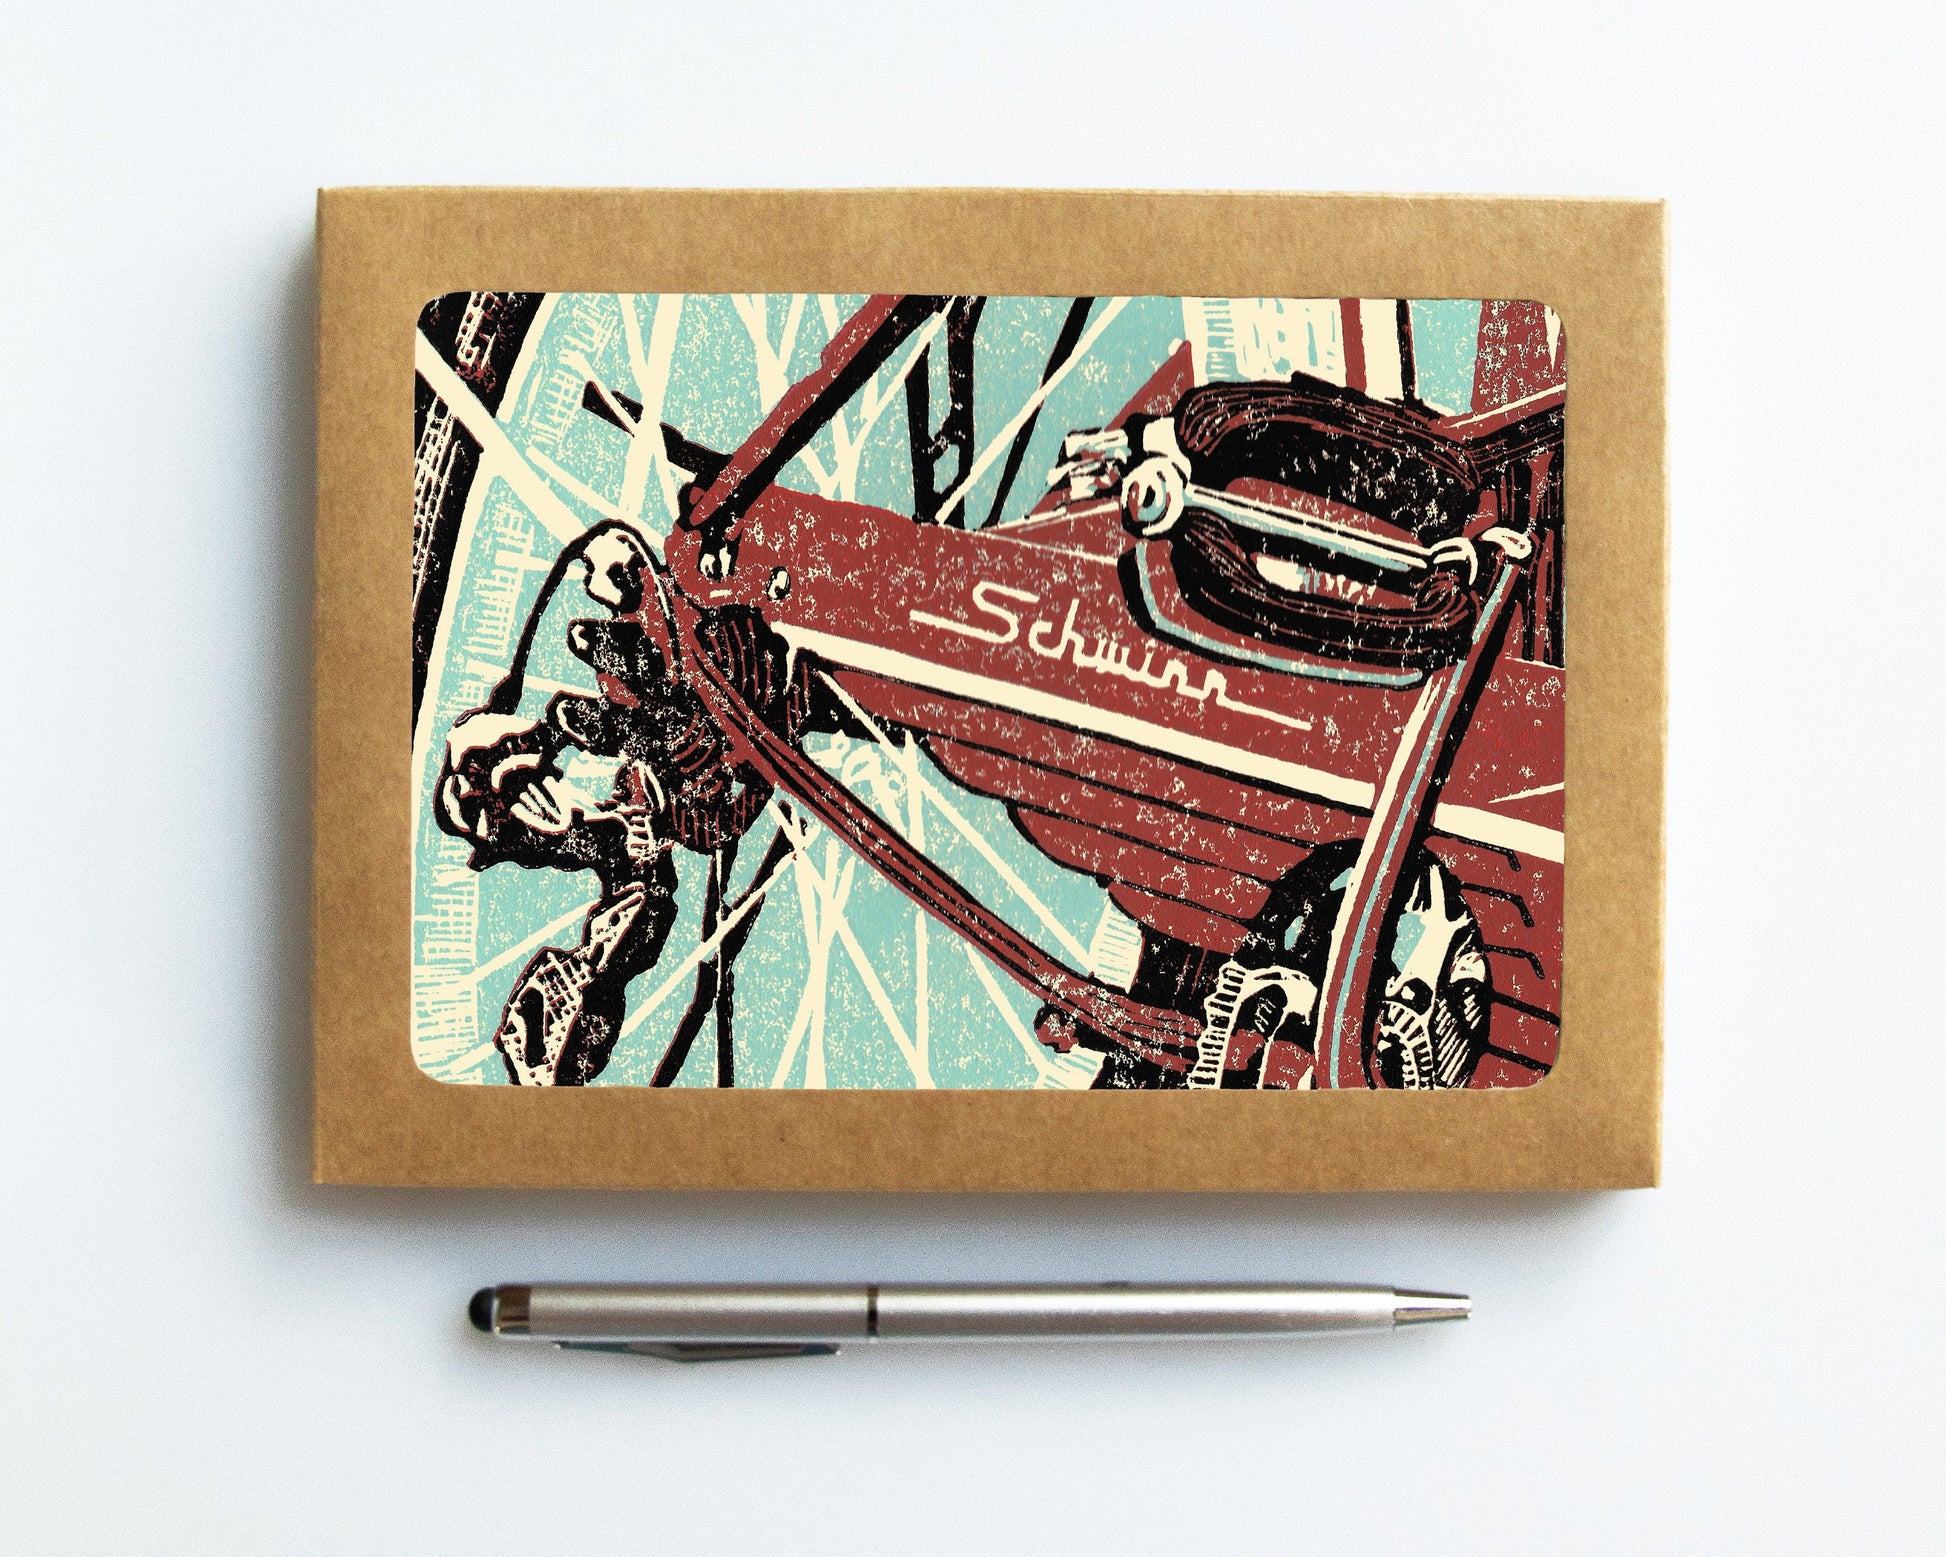 A casually elegant card set featuring bicycle art by Natalia Wohletz of Peninsula Prints.